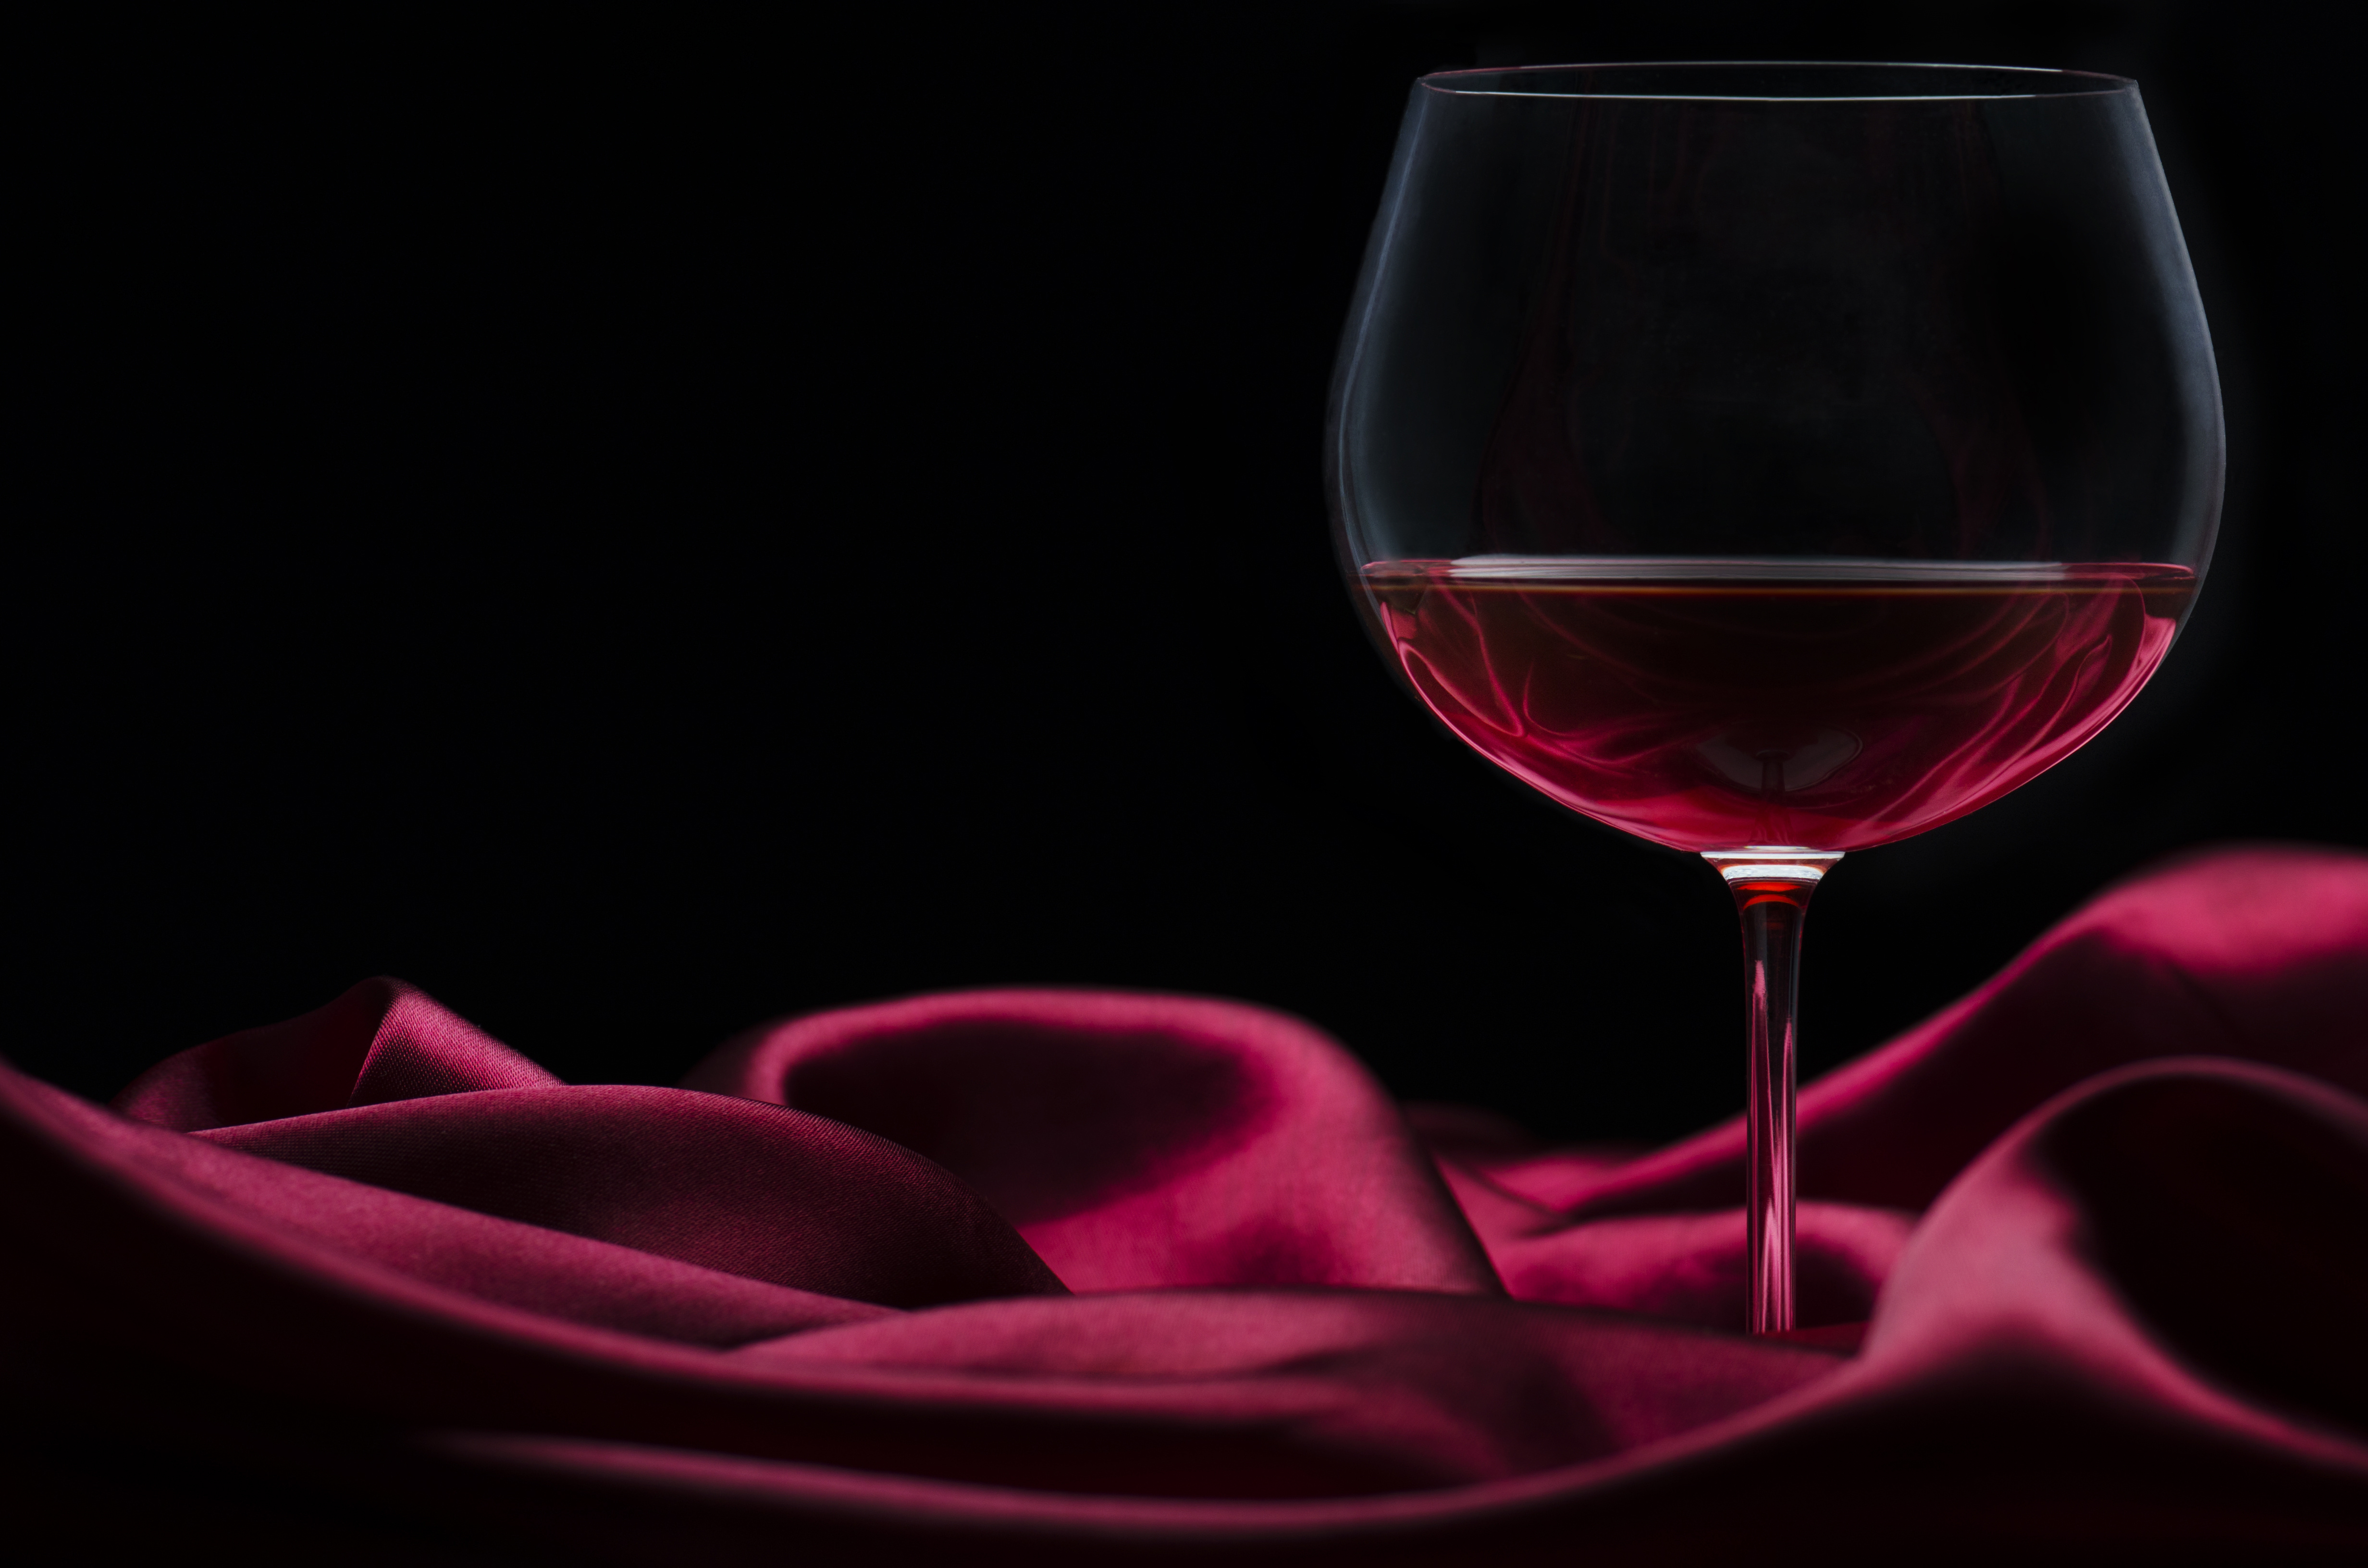 wine glass wallpapers screensavers hi quality photo Car Pictures 4928x3264